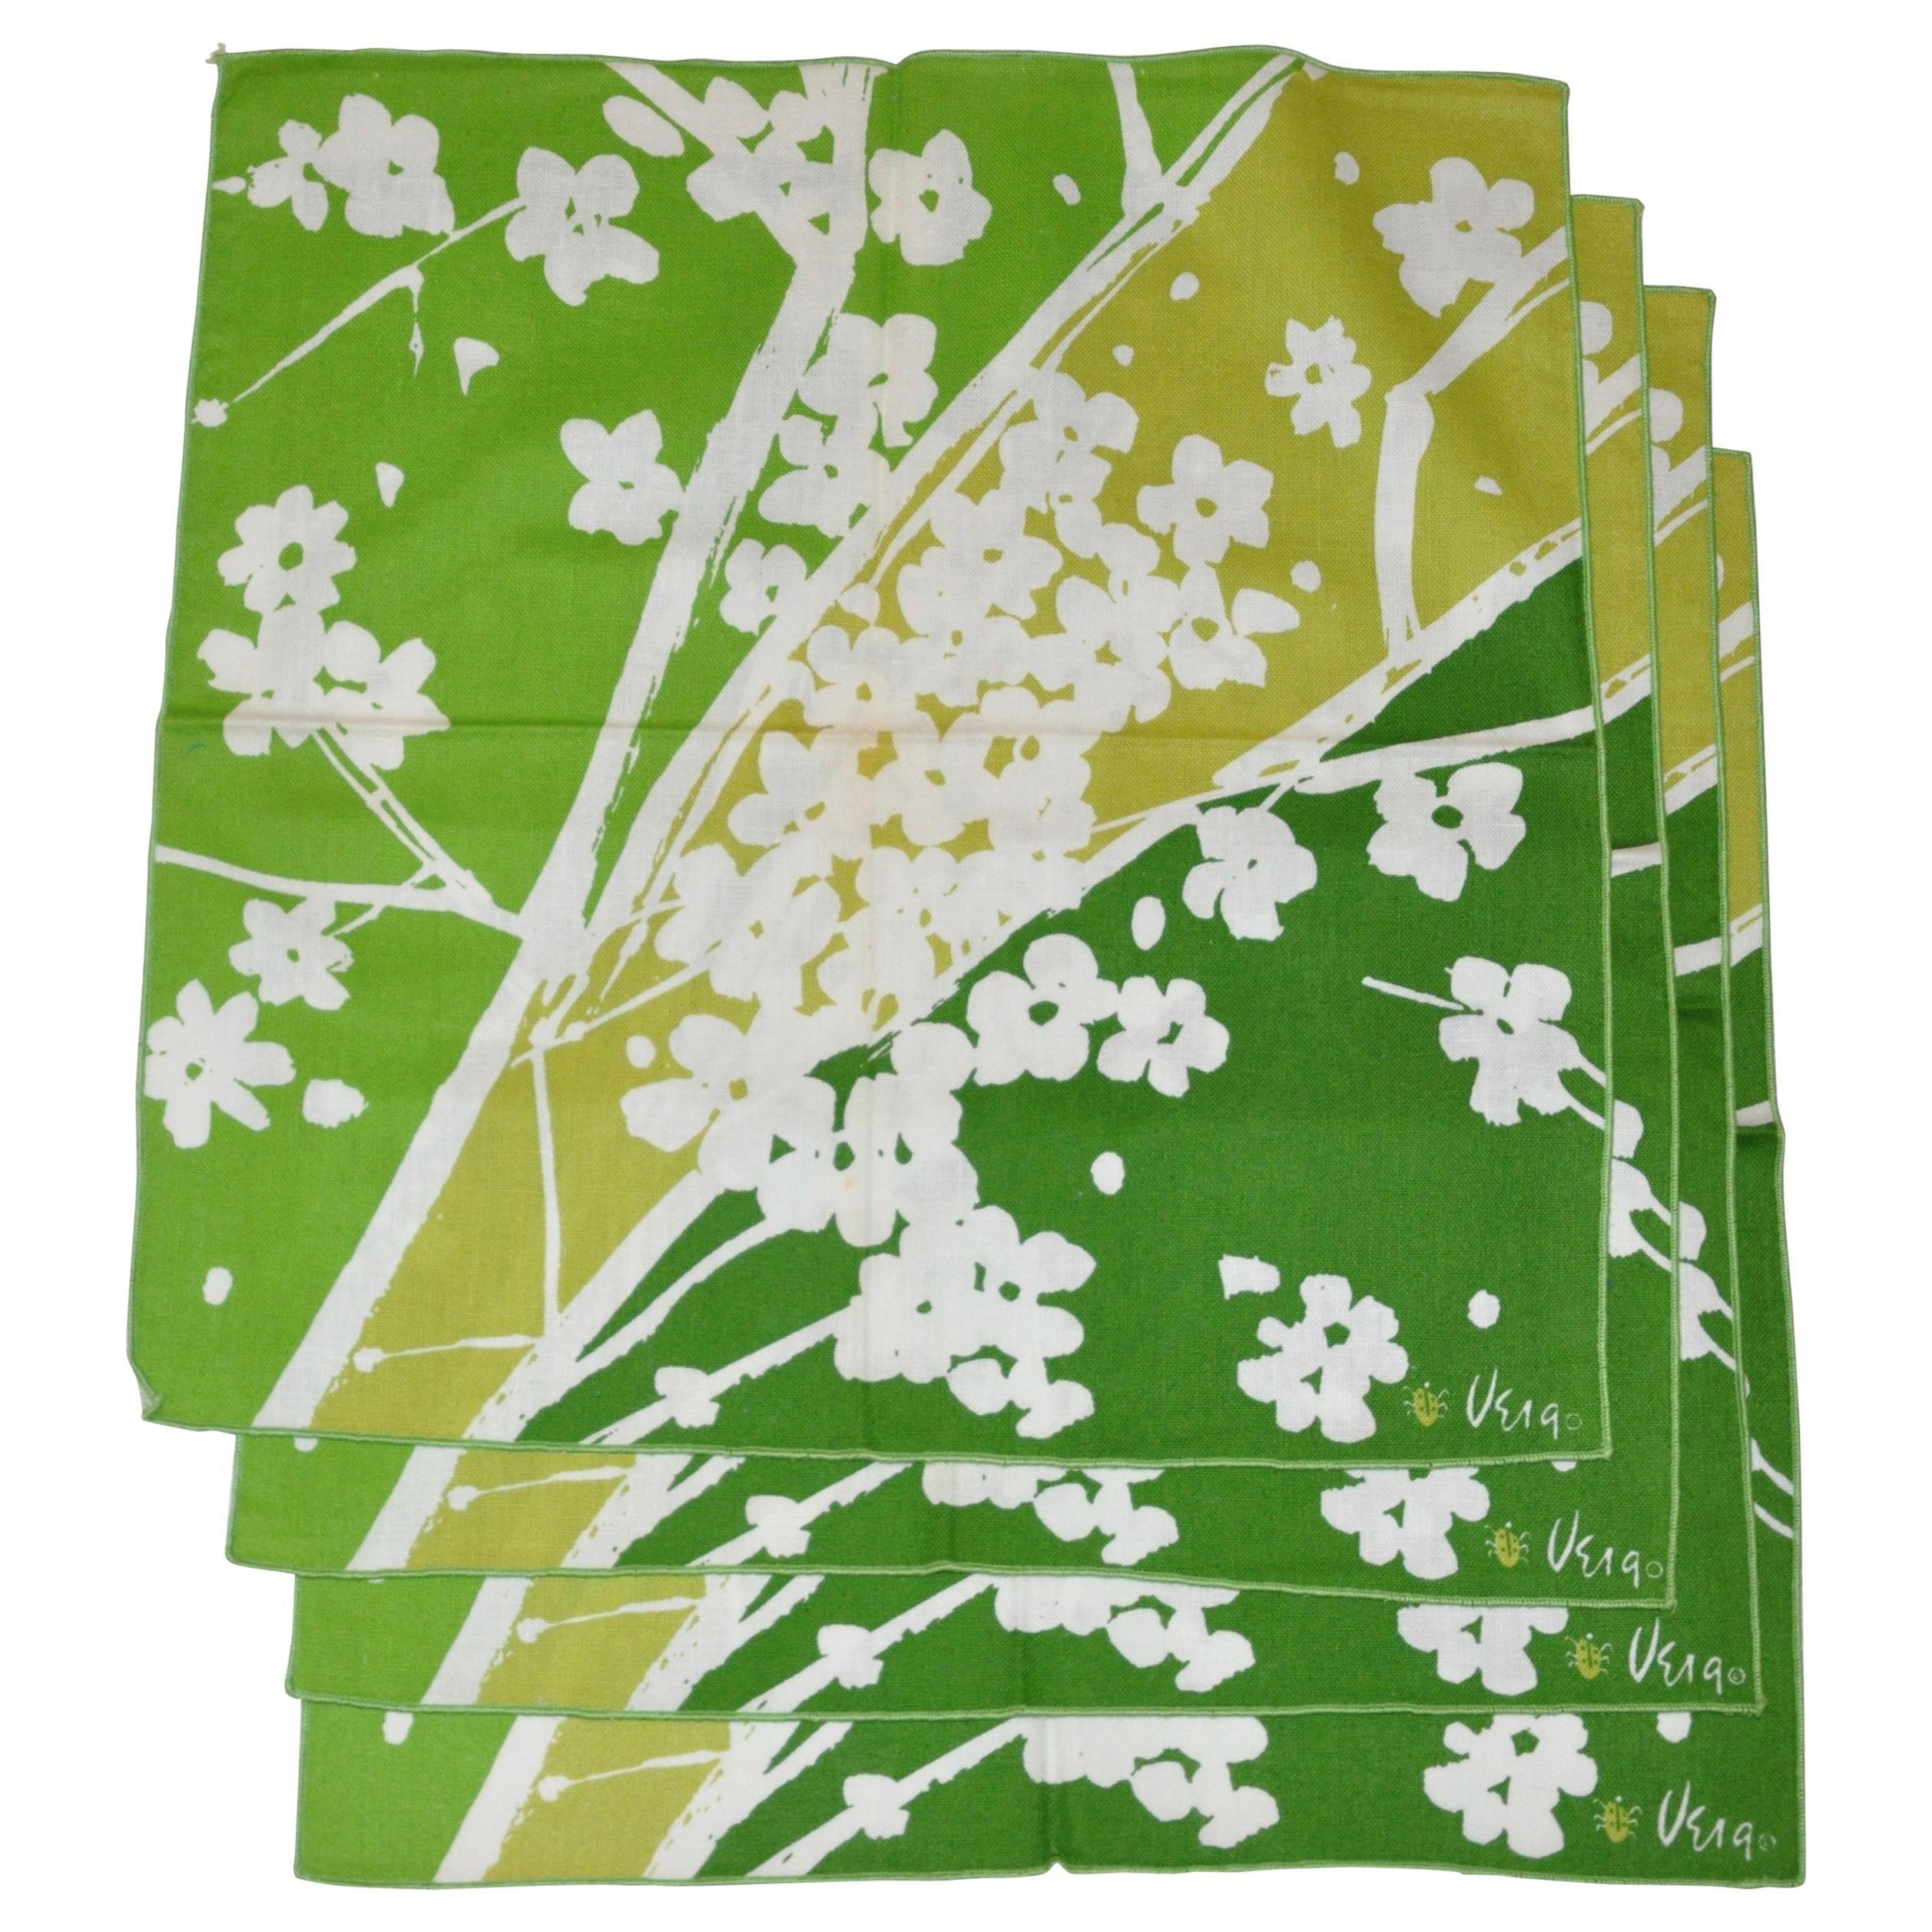 Vera Shades of Emerald Green & White "Set of 4" Floral Napkins